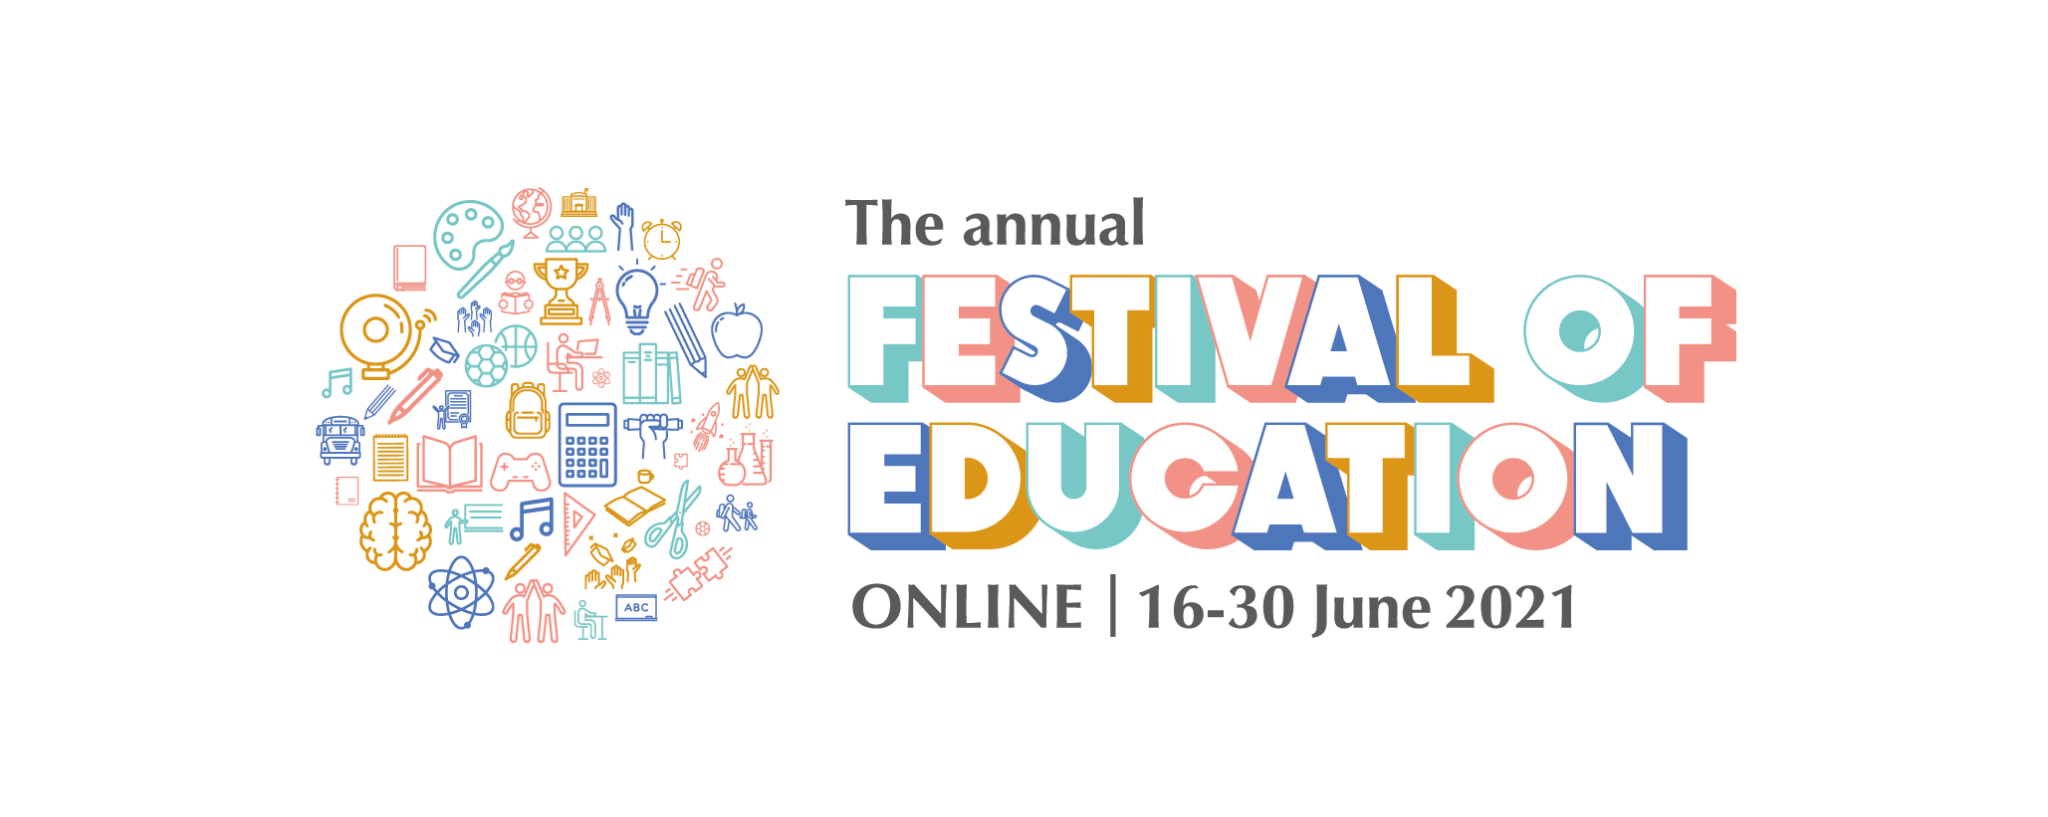 The 2021 Festival of Education & Trinity College London